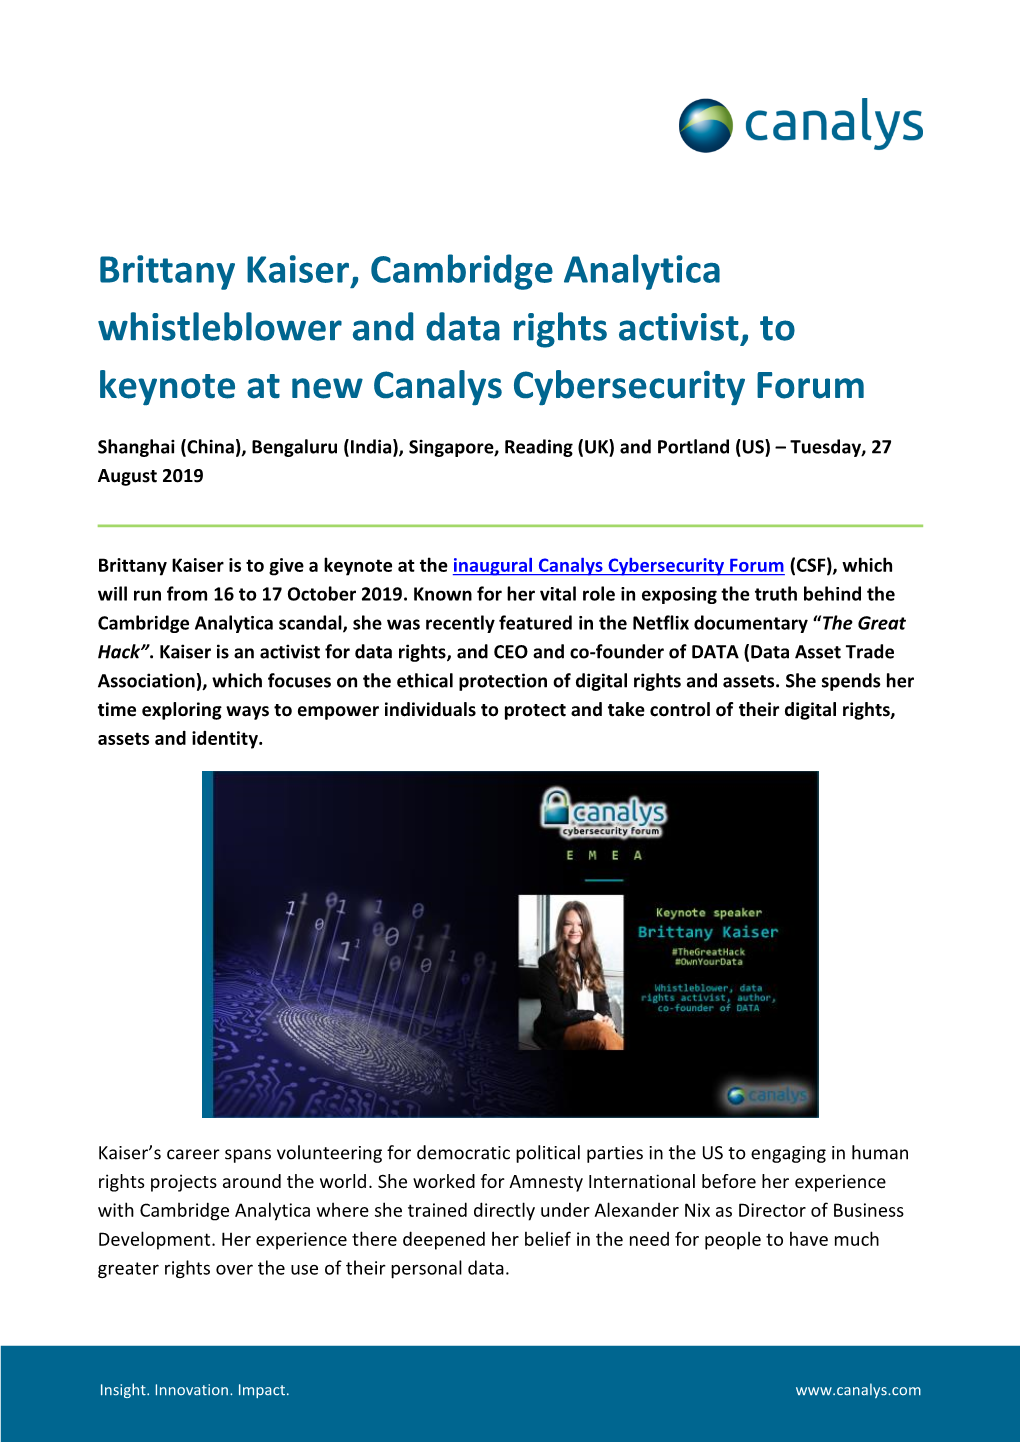 Brittany Kaiser, Cambridge Analytica Whistleblower and Data Rights Activist, to Keynote at New Canalys Cybersecurity Forum